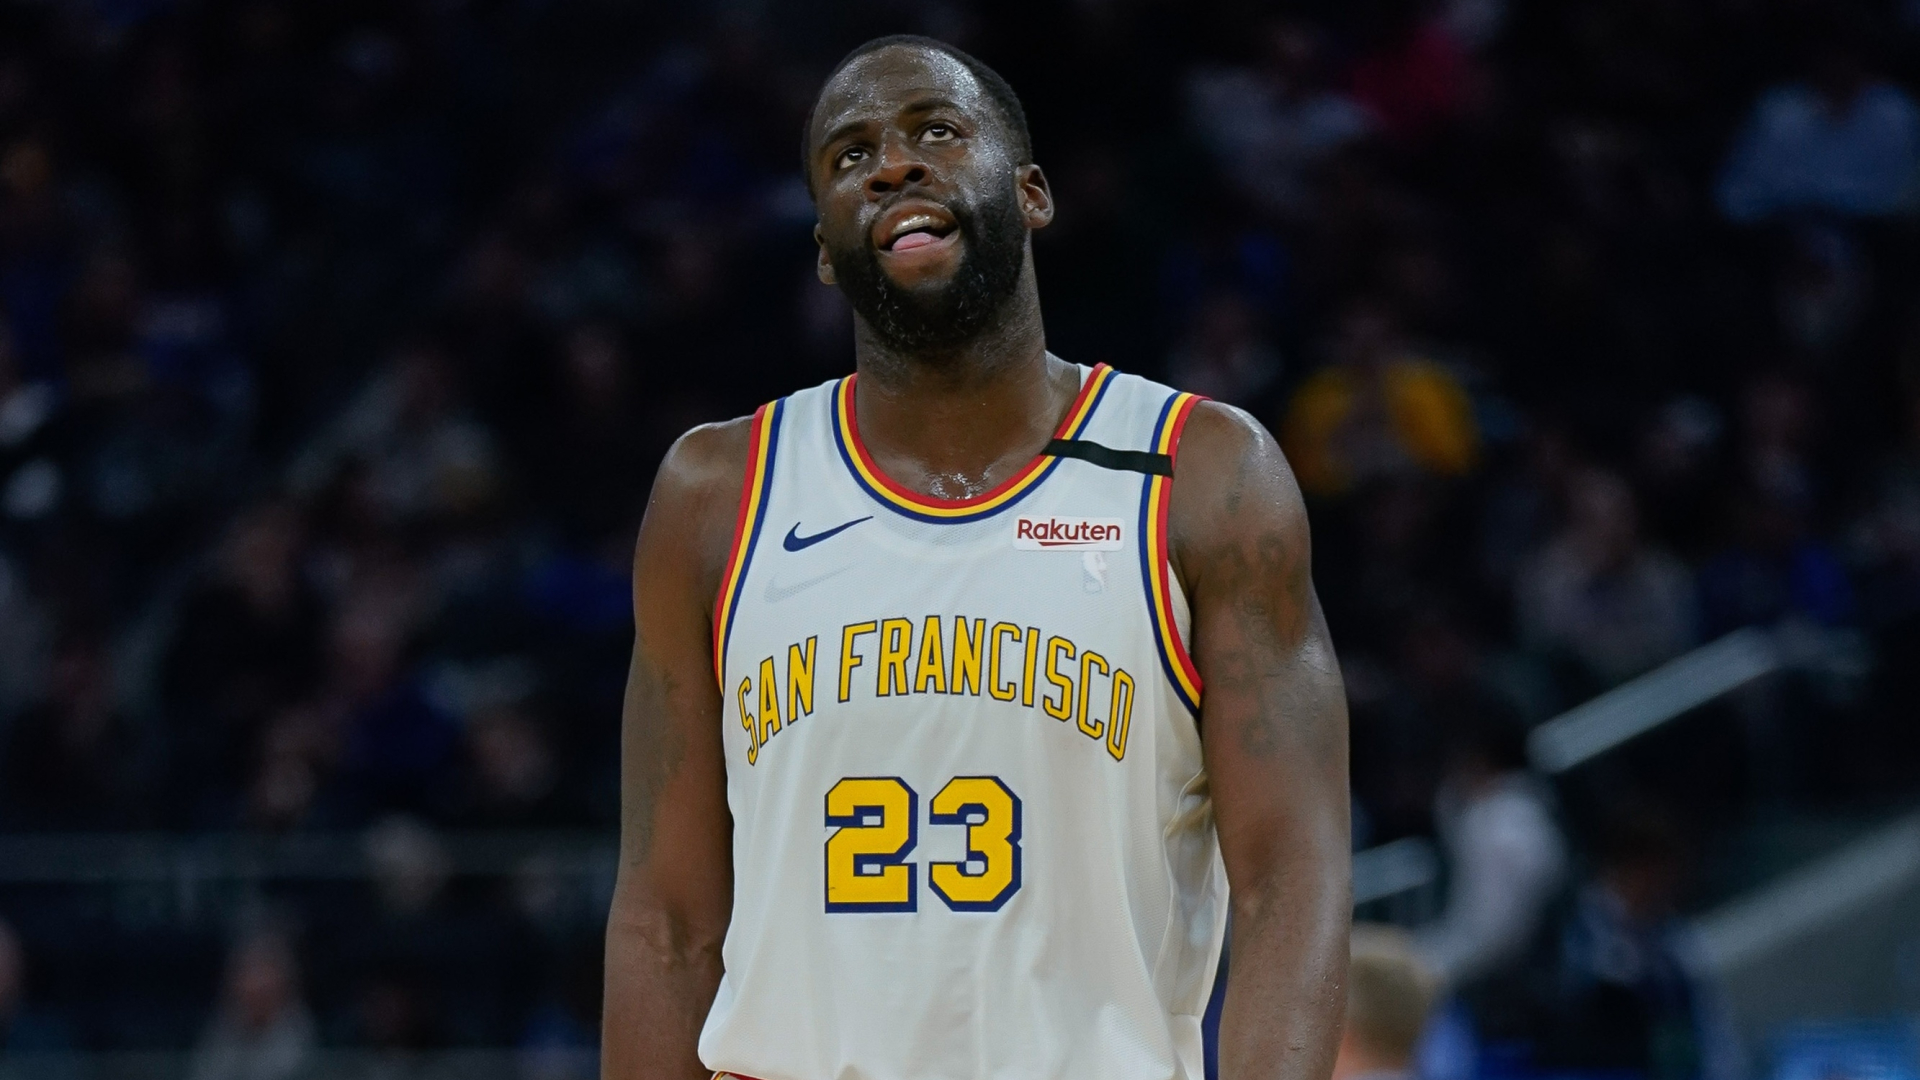 Warriors' Draymond Green Receives $50,000 Tampering Fine for Comments About Suns' Devin Booker